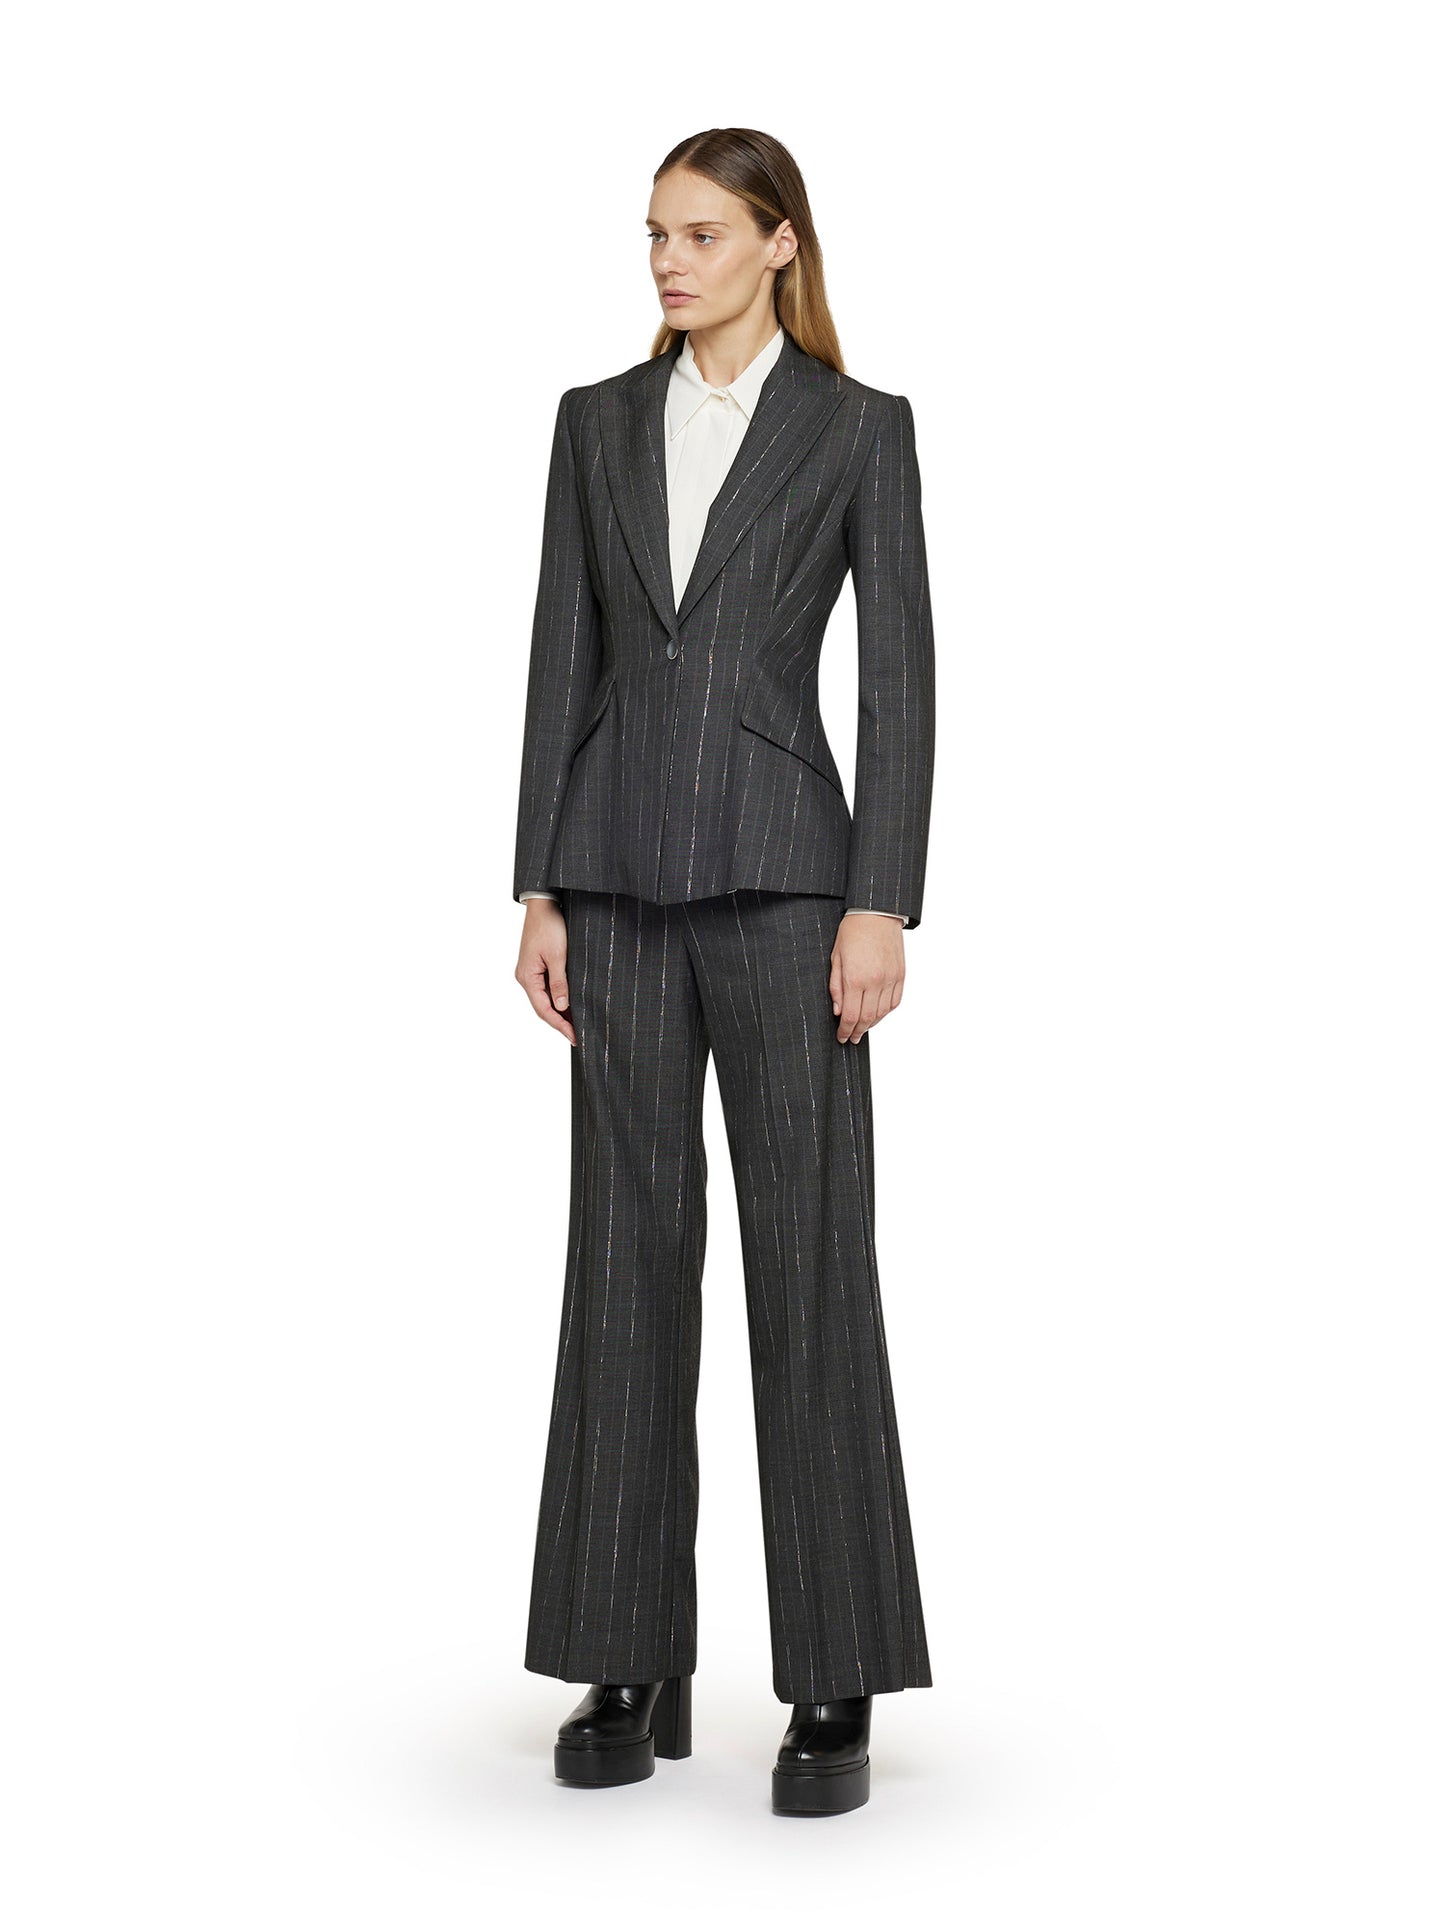 Palazzo trousers in translucent pinstripe with smoked button motif